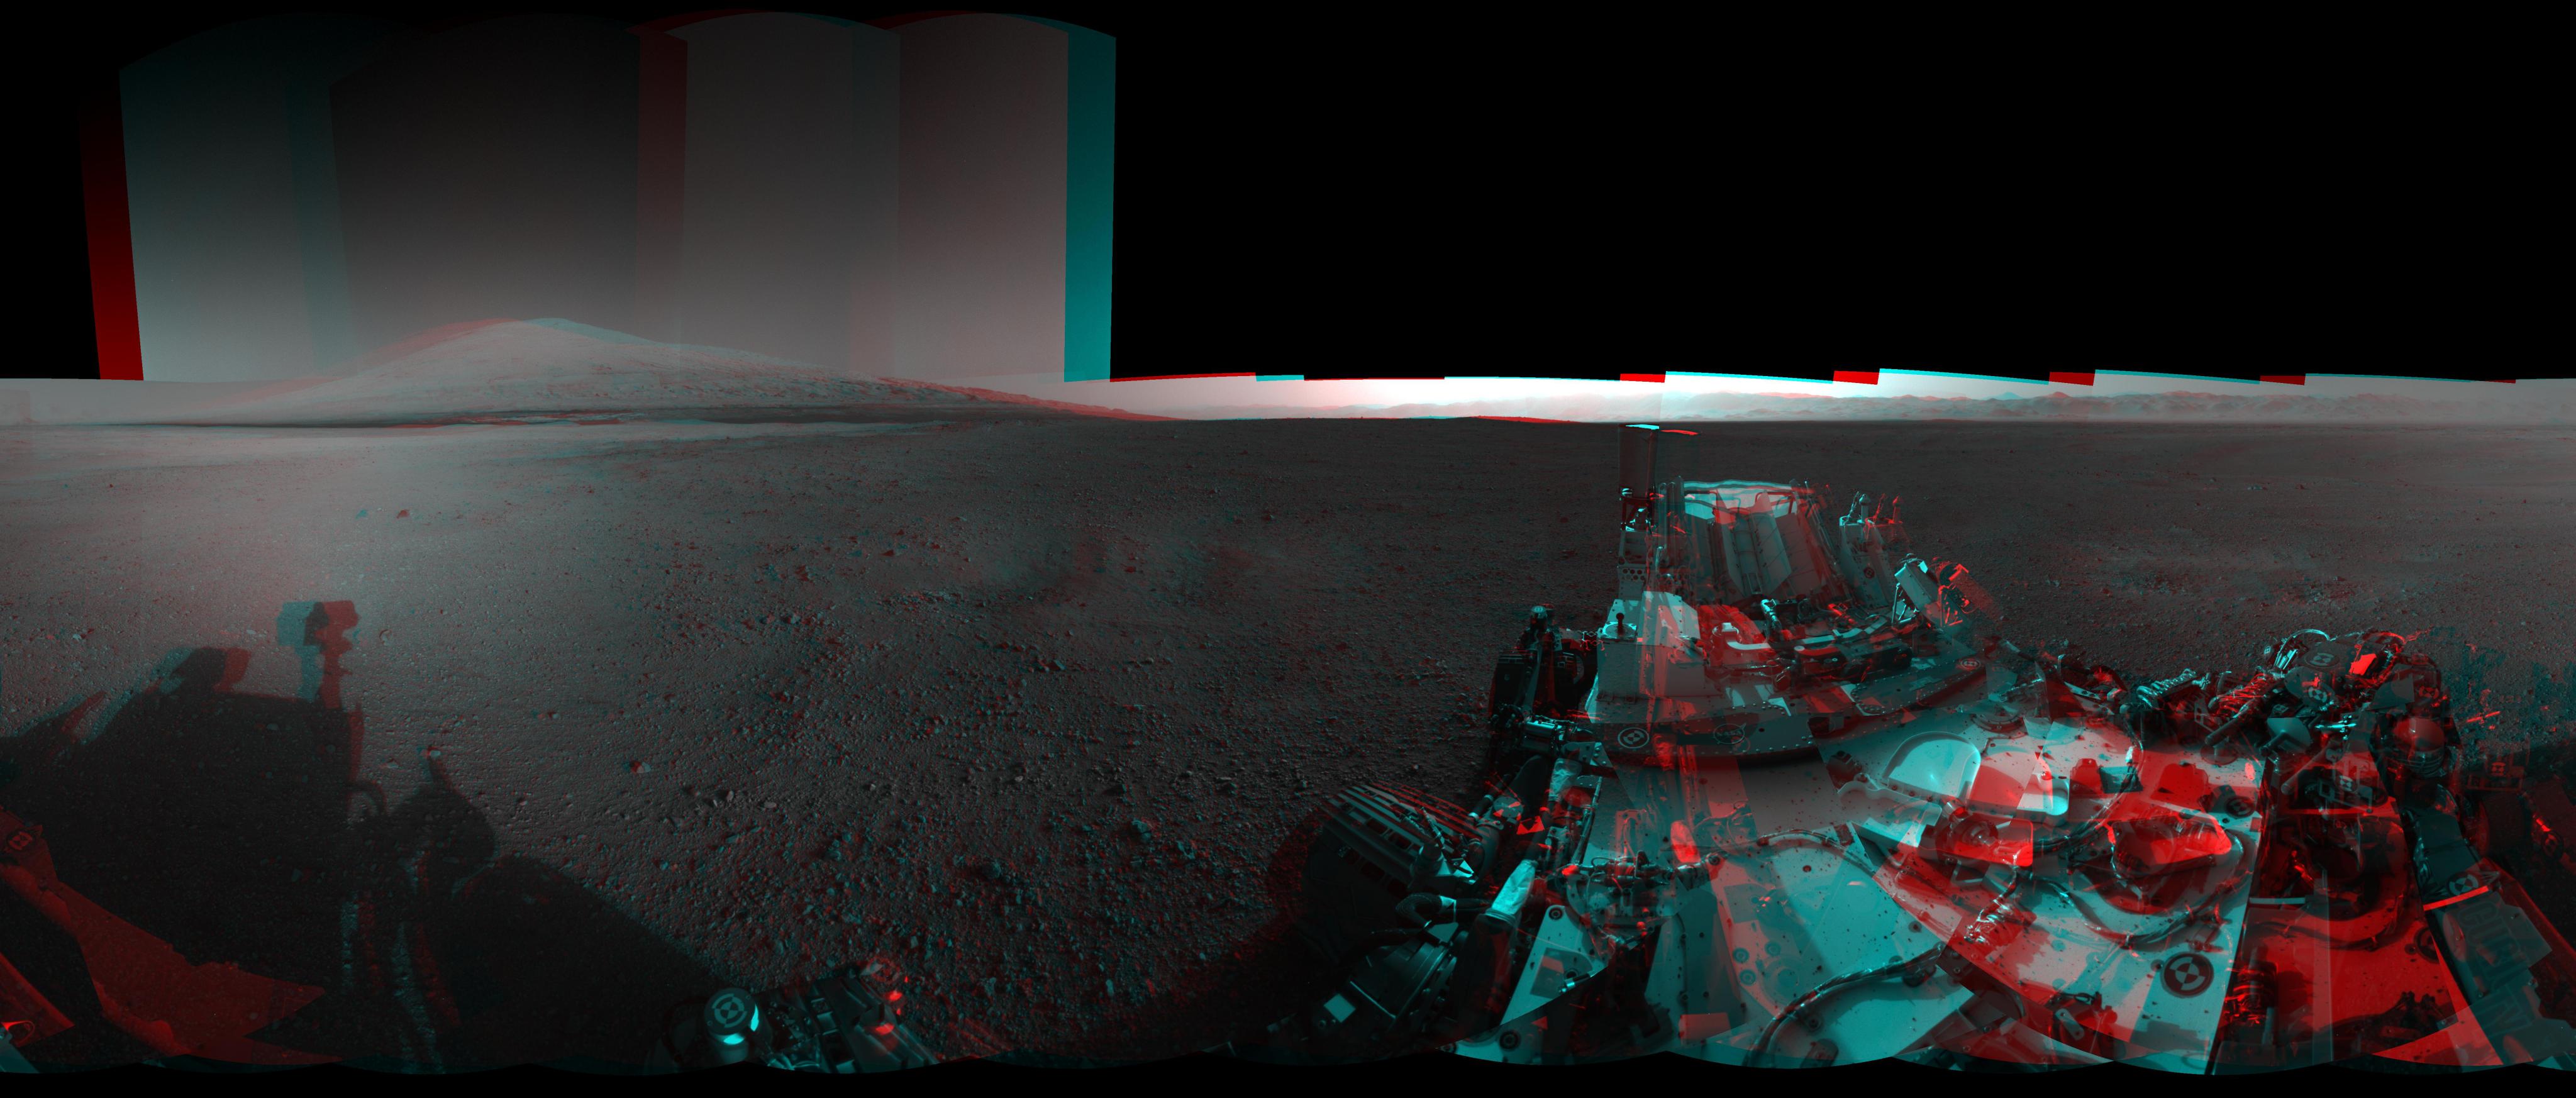 This 3-D image from NASA's Curiosity was taken from the rover's Bradbury Landing site inside Gale Crater, Mars, using the left and right eyes of its Navigation camera.